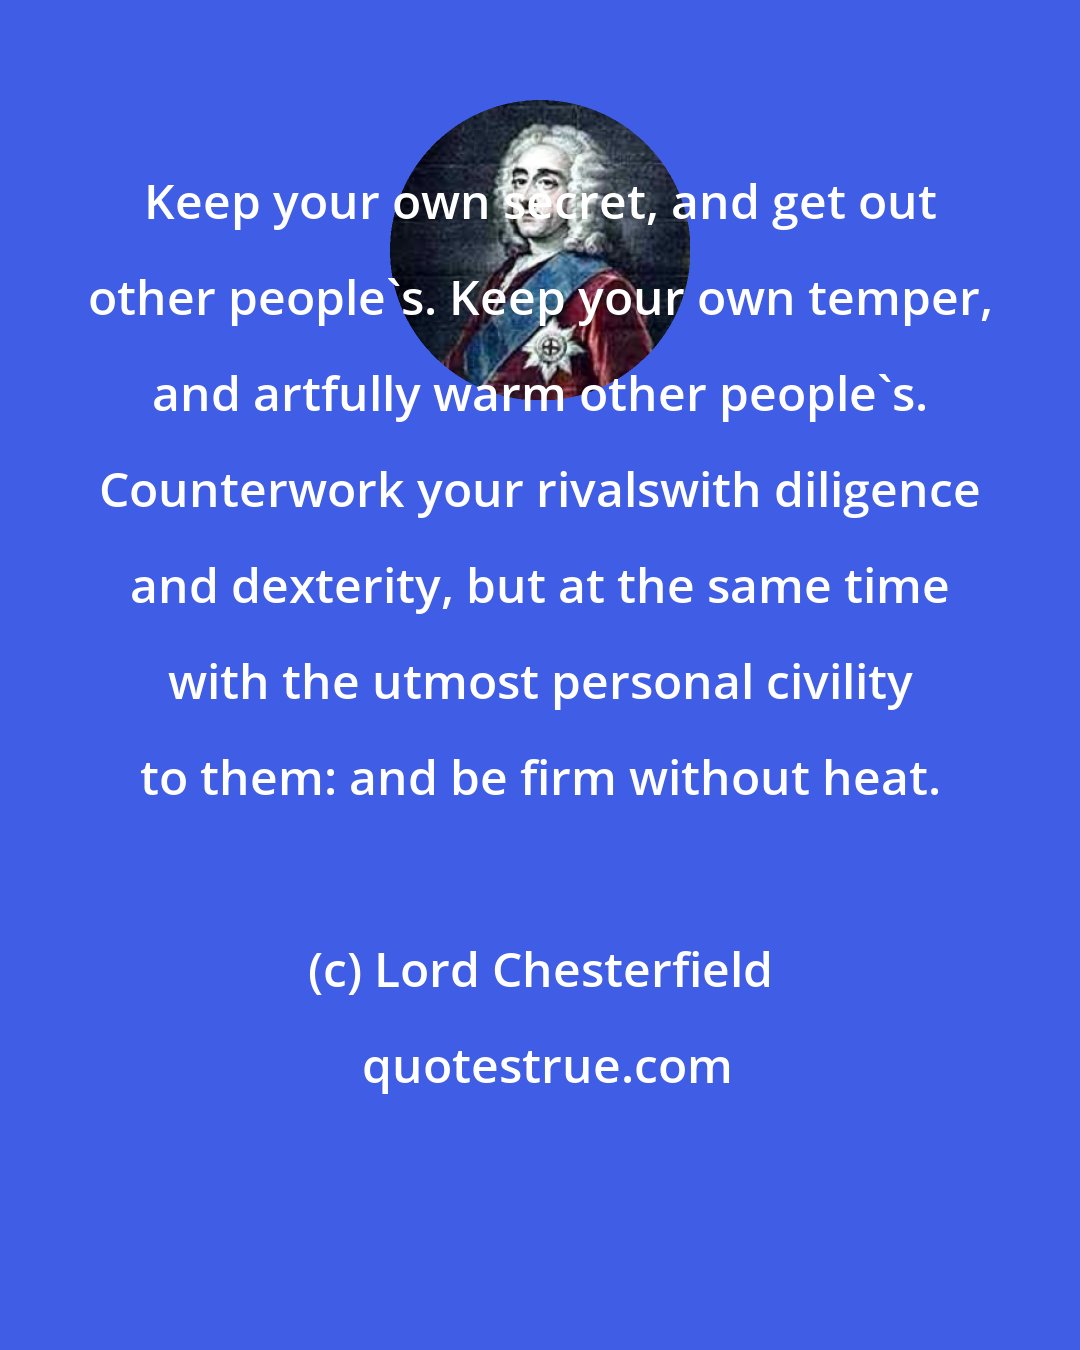 Lord Chesterfield: Keep your own secret, and get out other people's. Keep your own temper, and artfully warm other people's. Counterwork your rivalswith diligence and dexterity, but at the same time with the utmost personal civility to them: and be firm without heat.